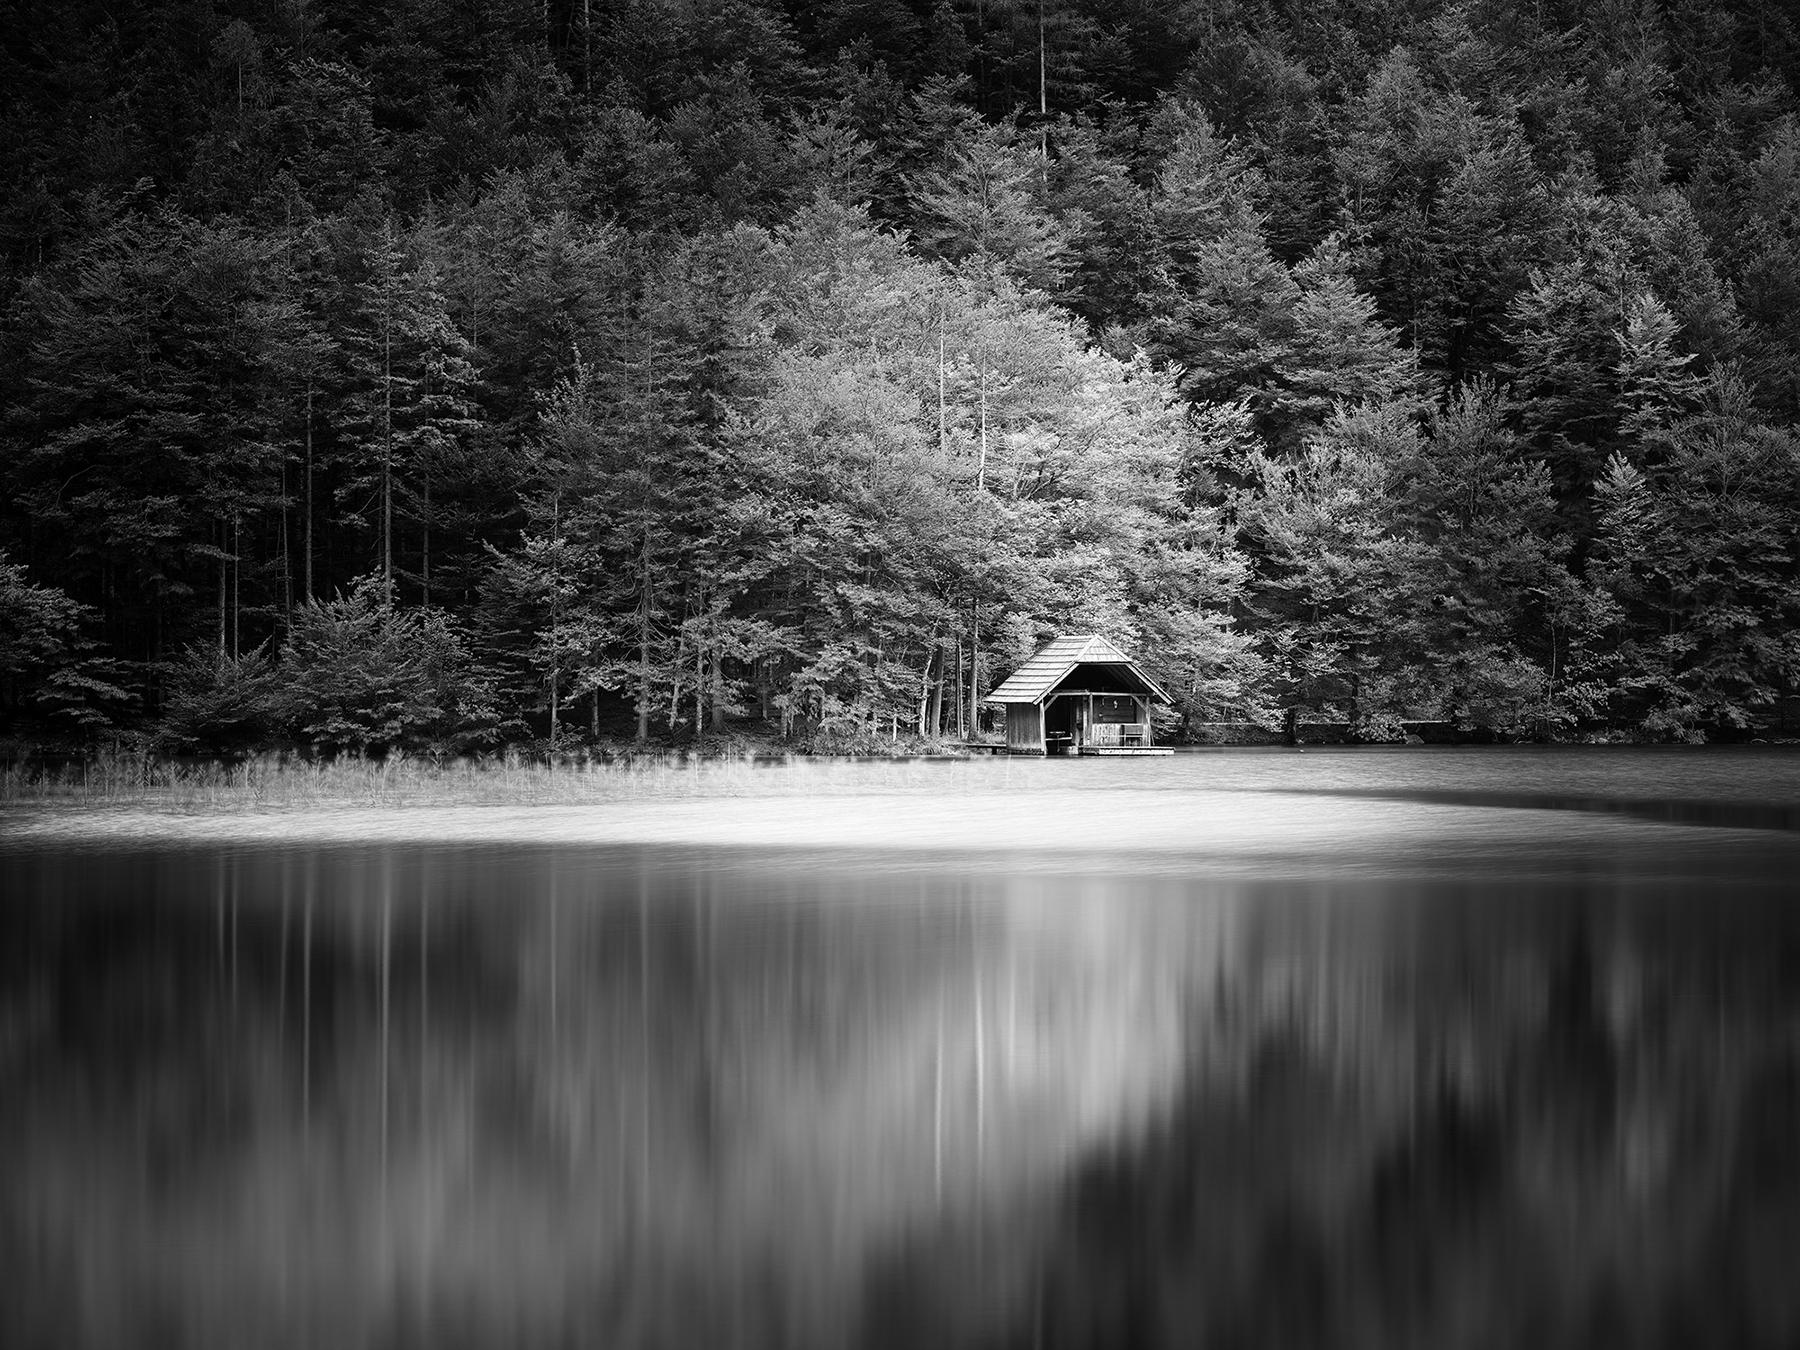 Gerald Berghammer Black and White Photograph - Wooden Boat House, Lake, Forest, Austria, black and white photography, landscape